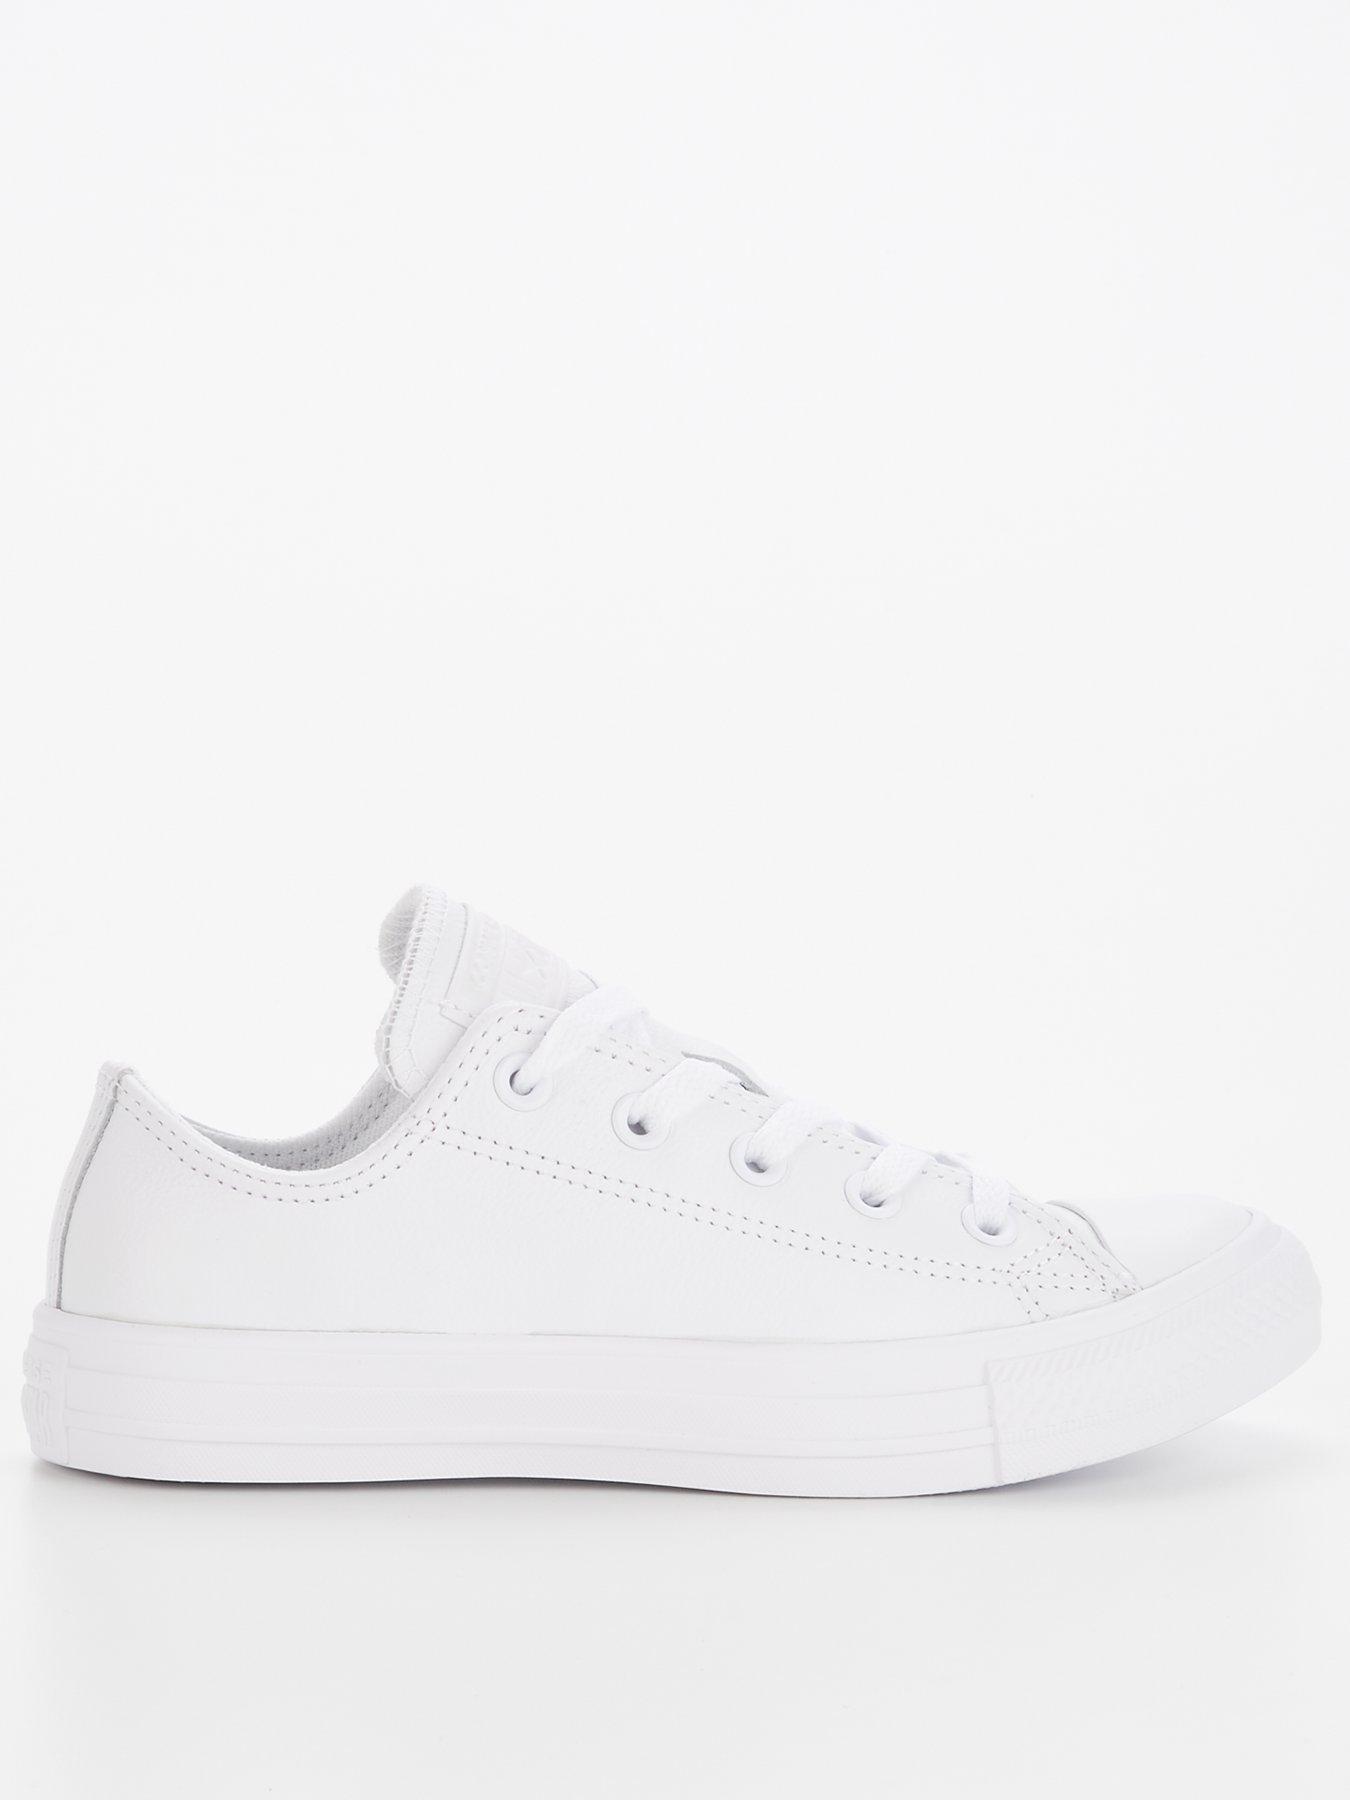 converse womens white trainers